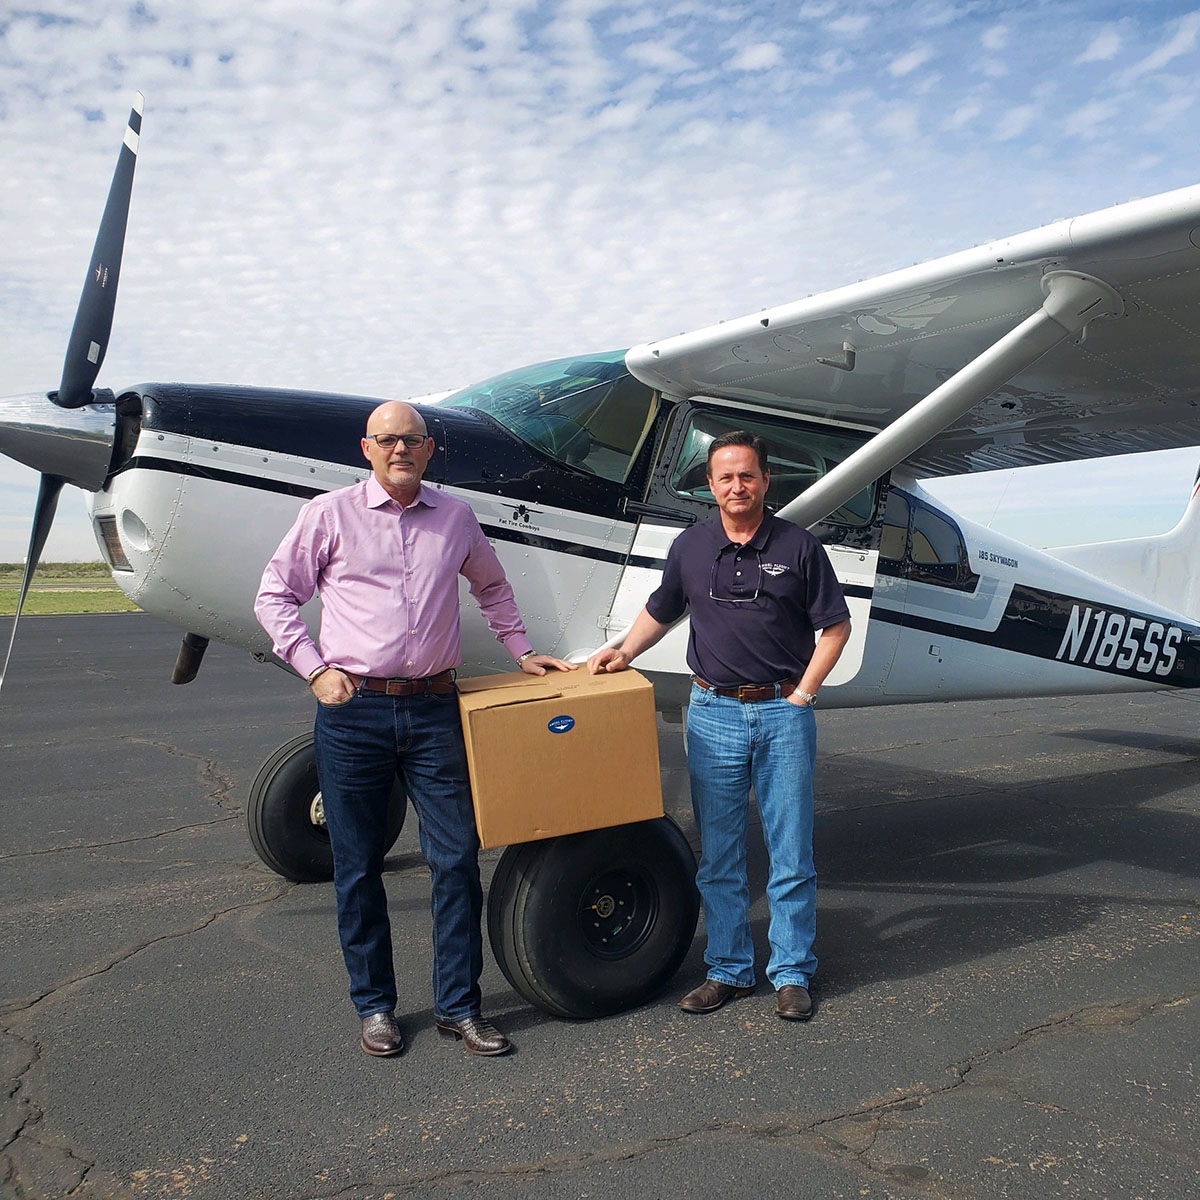 The first batch of face shields and ventilator splitters were flown to Monahans and Pecos over the weekend